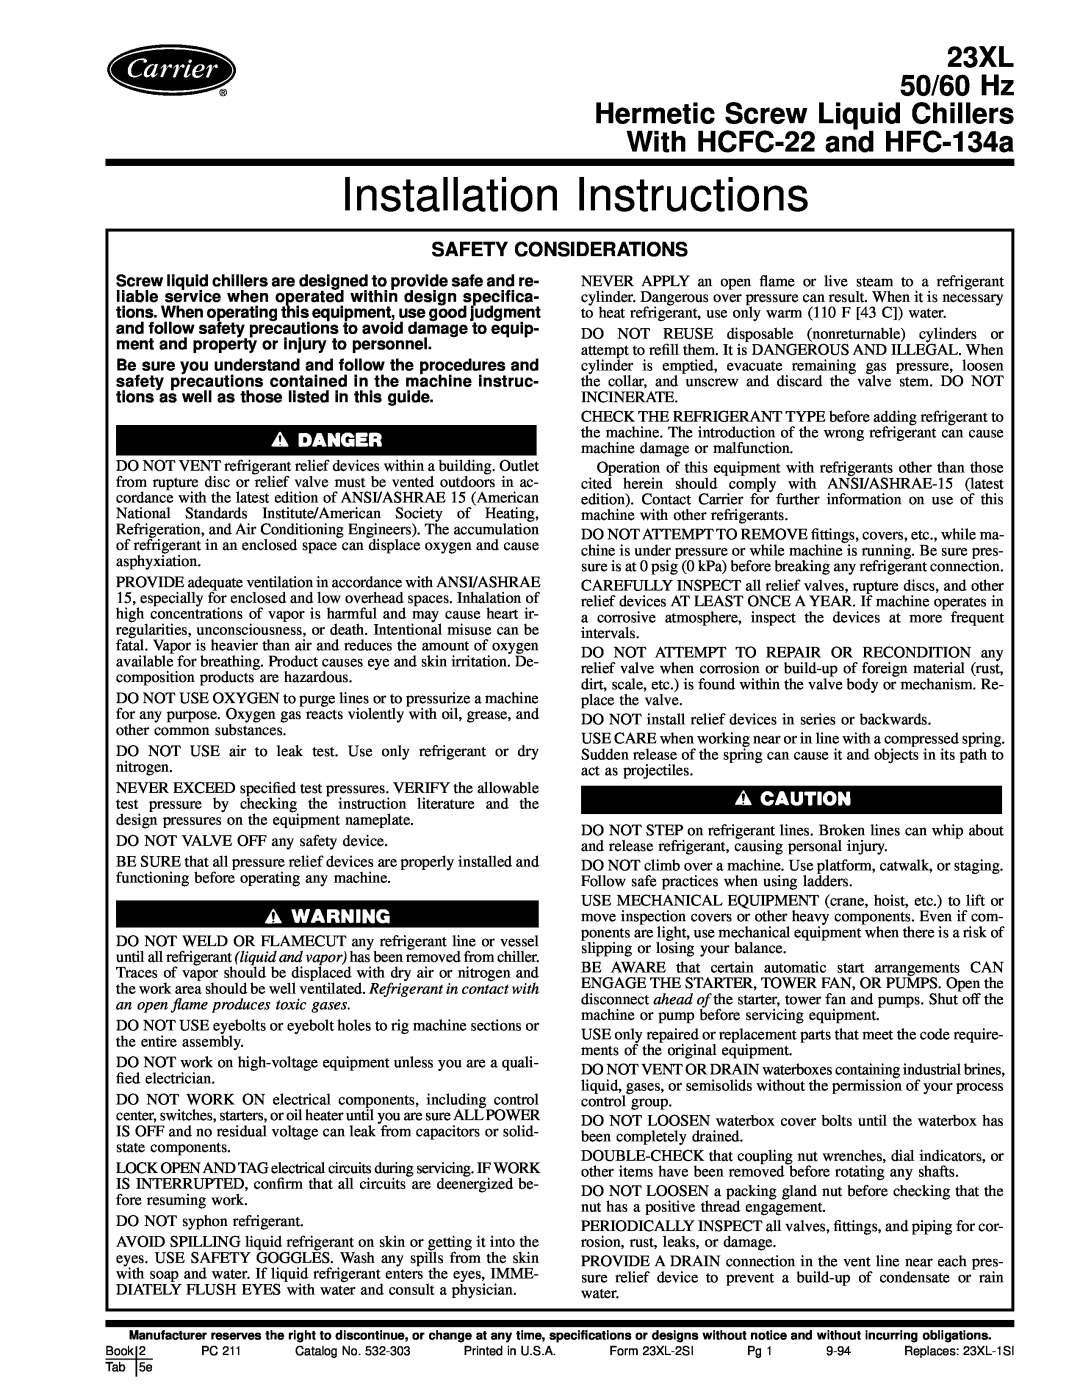 Carrier 23 XL installation instructions Safety Considerations, Installation Instructions, With HCFC-22and HFC-134a 